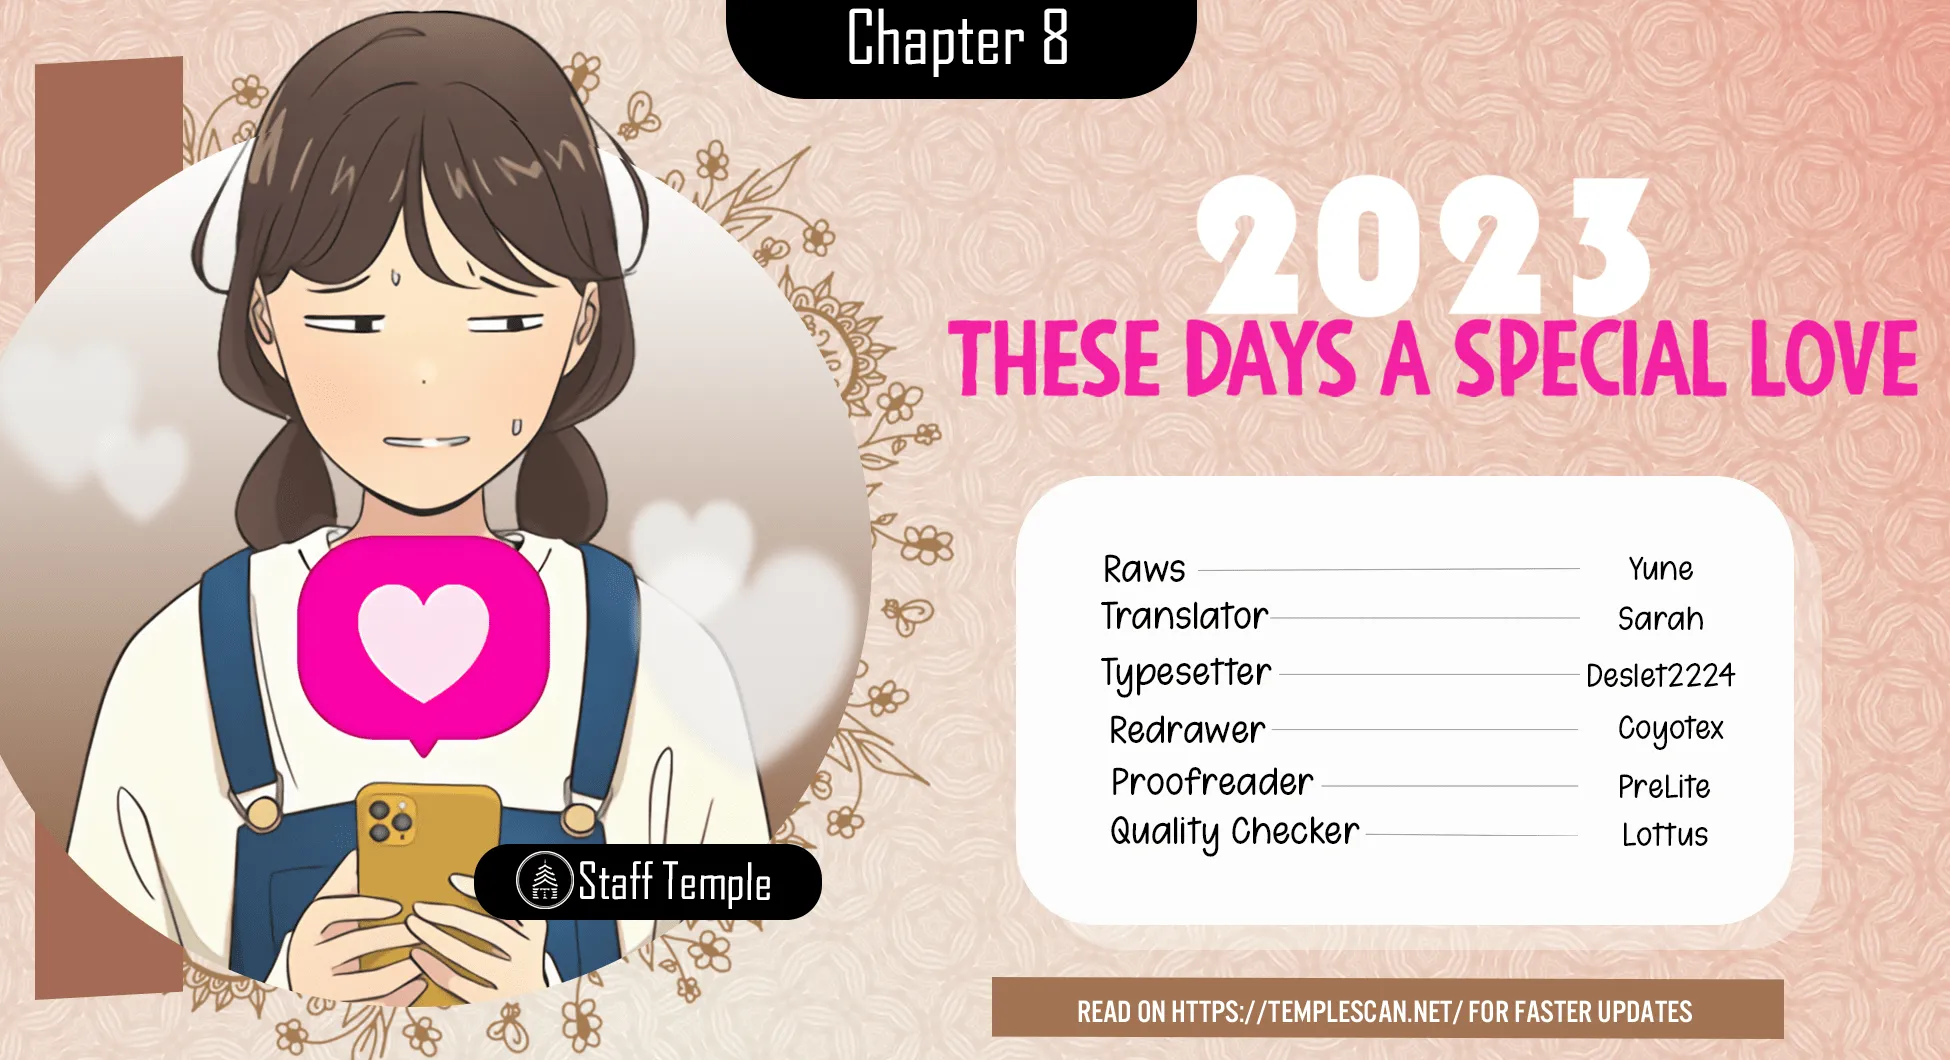 2023 These Days A Special Love chapter 8